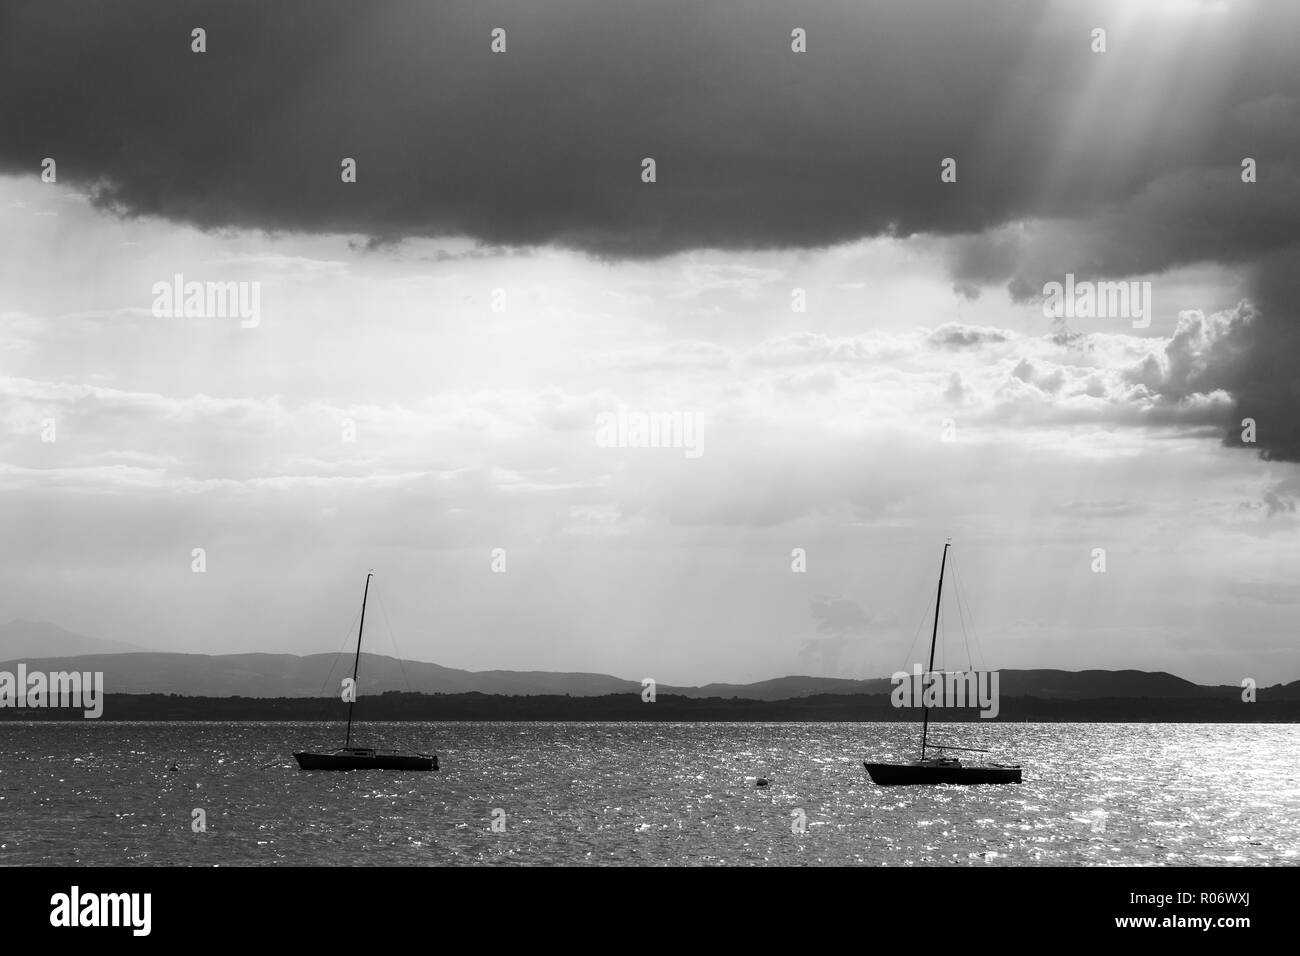 A couple of empty, little sailboat on a lake, beneath a moody sky with sun rays filtering through. Stock Photo